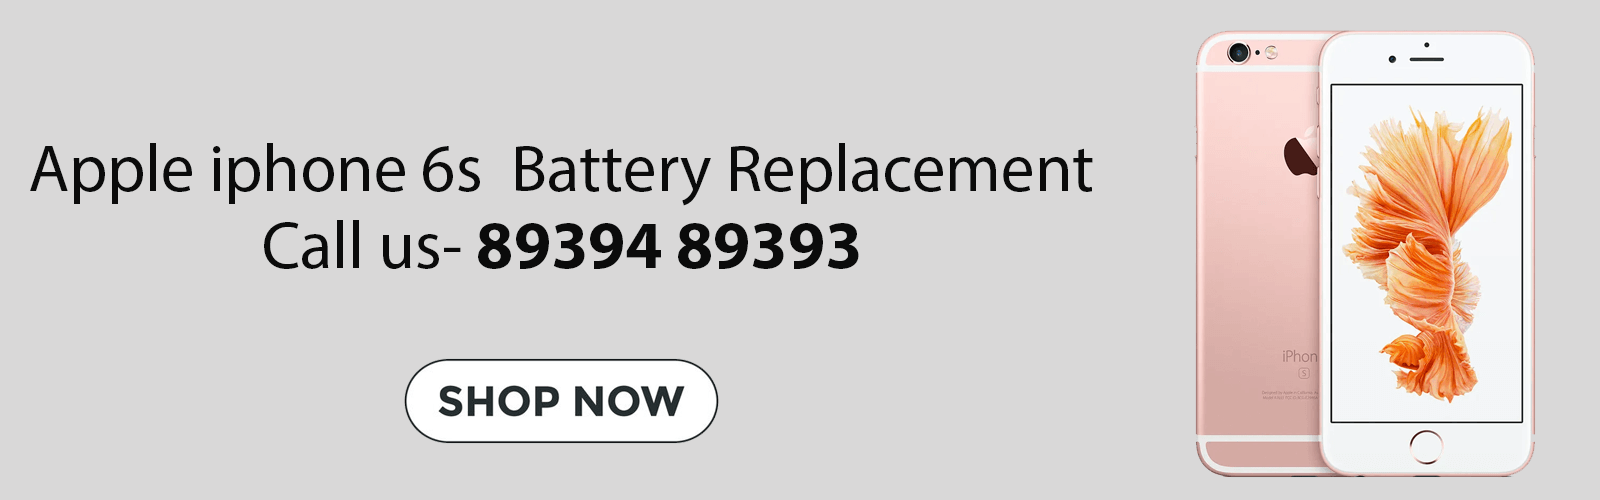 iPhone 6S Battery Replacement Price Chennai